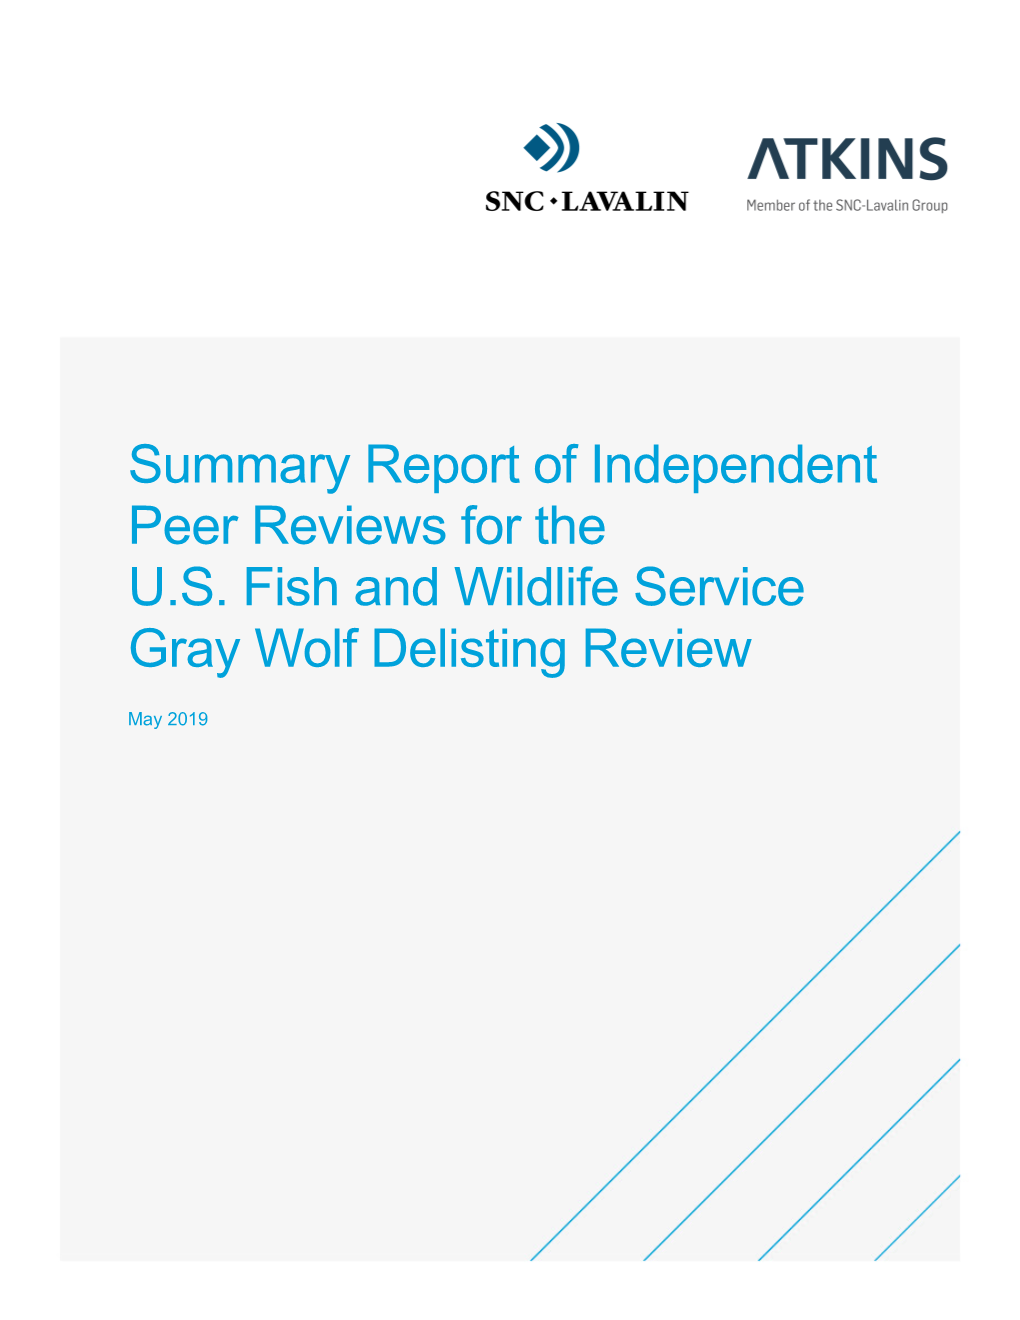 Gray Wolf Peer Review Summary